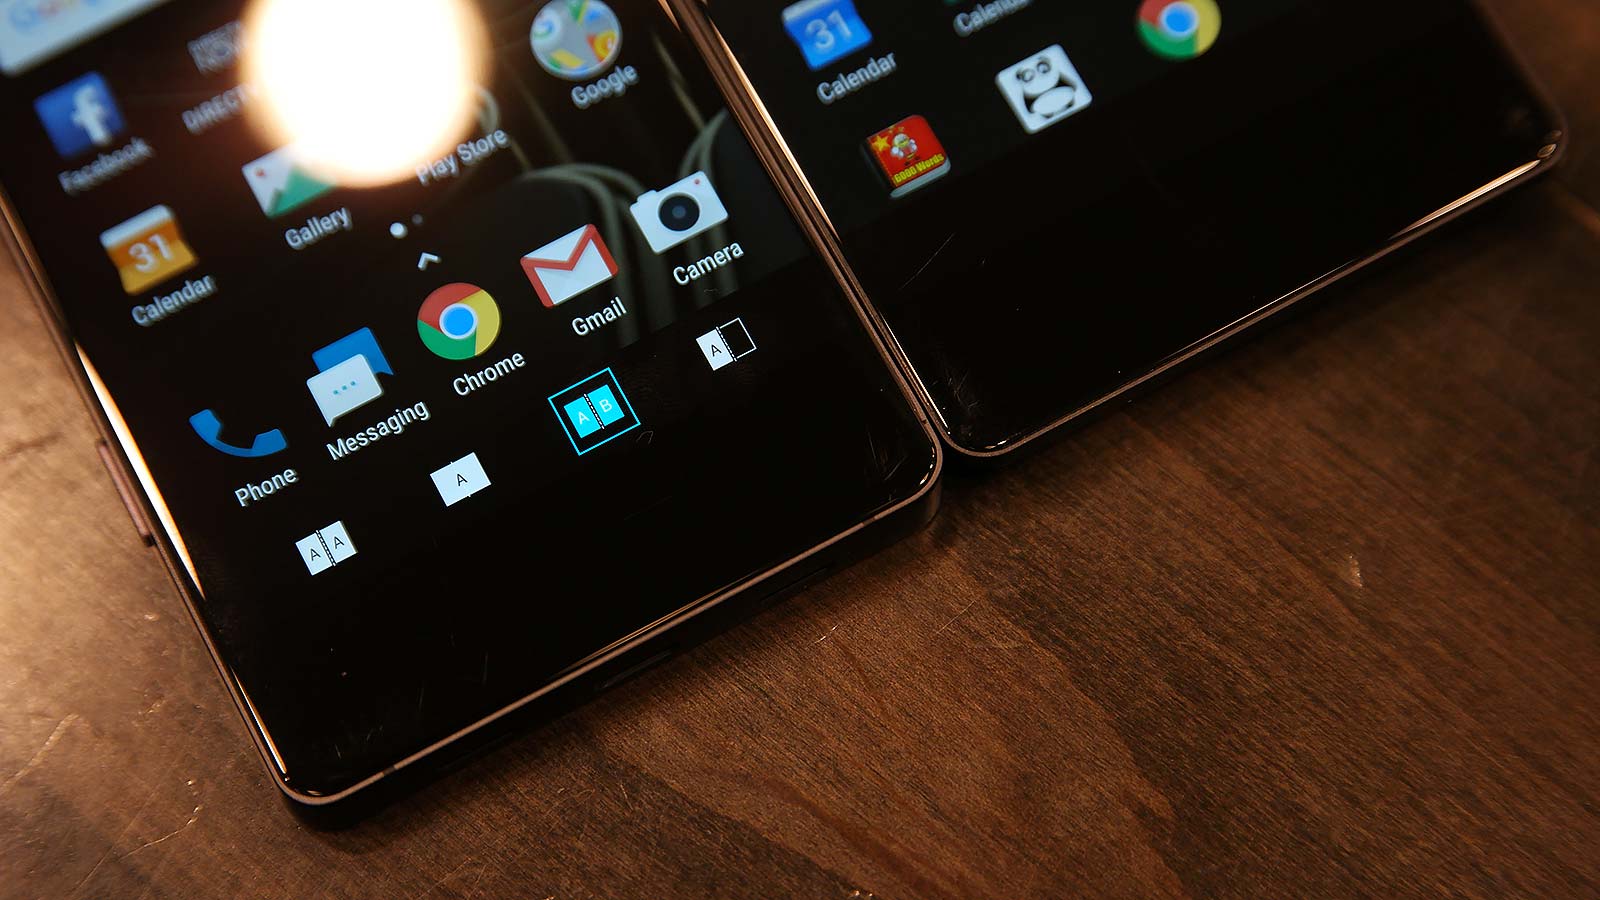 ZTE’s Dual Screen Axon M Phone: The Gizmodo Hands-On